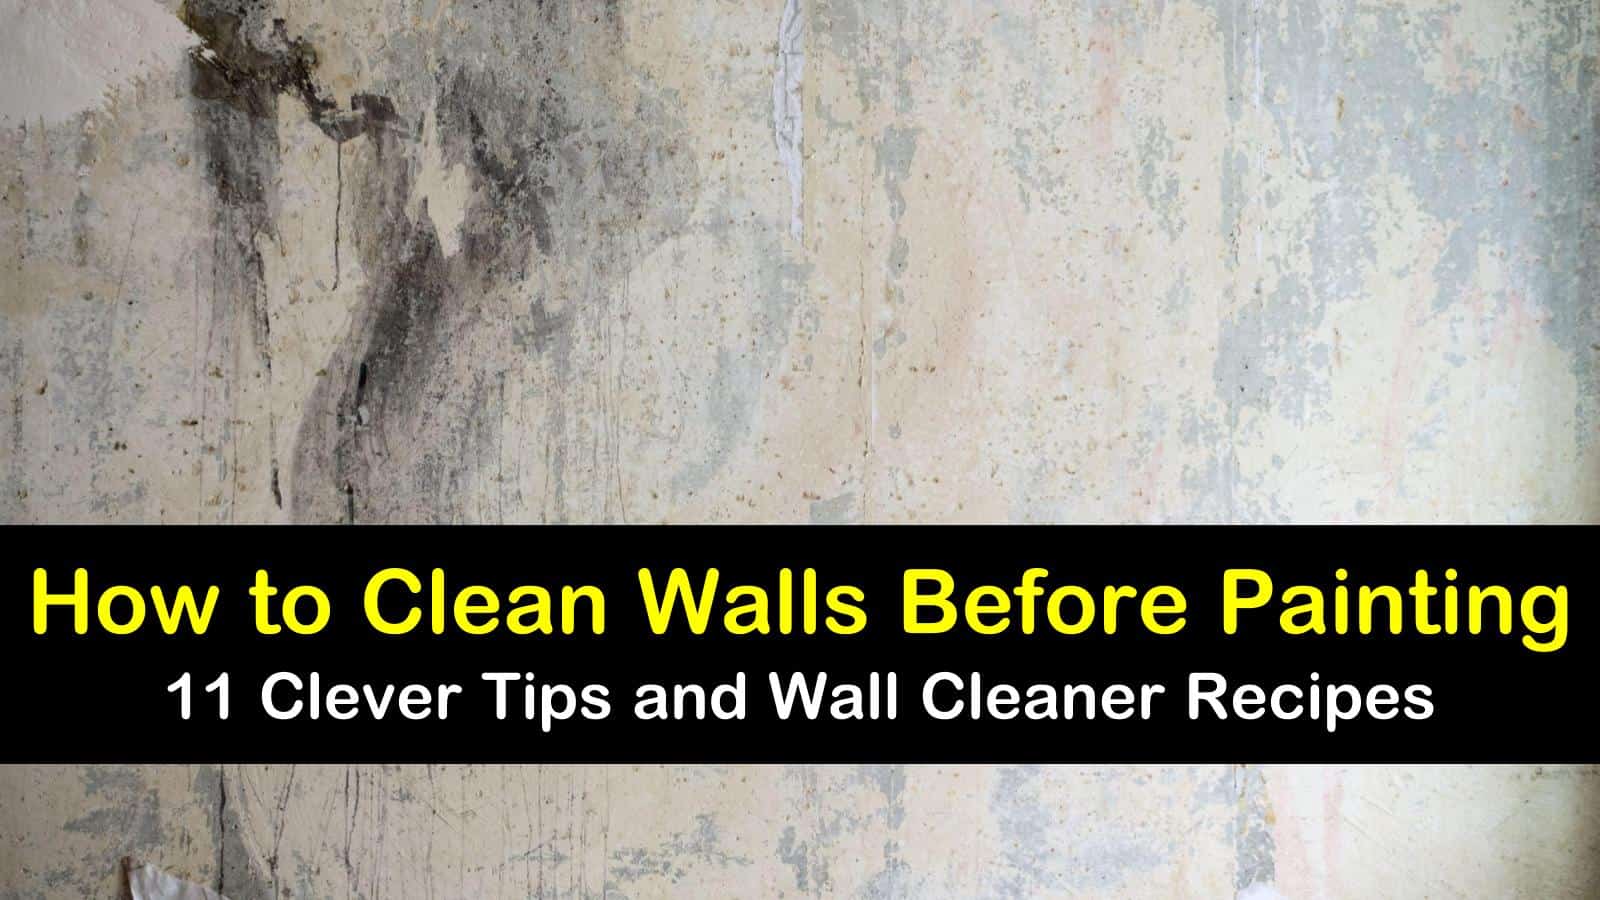 How to Clean Walls Before Painting - 11